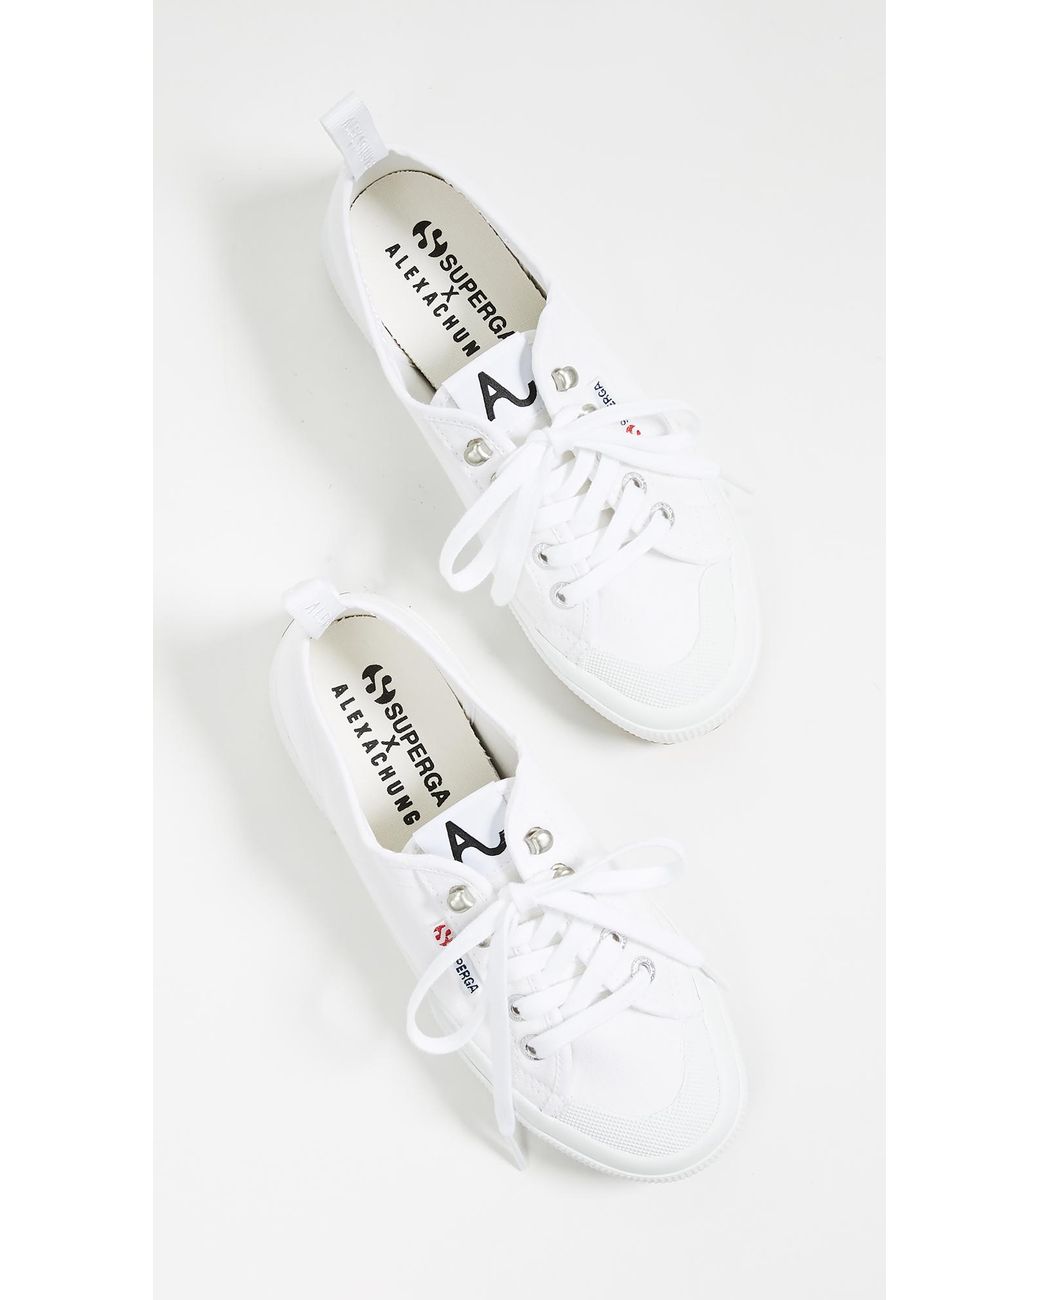 Superga Canvas X Alexa Chung 2294 Cothook Lace Up Sneakers in White | Lyst